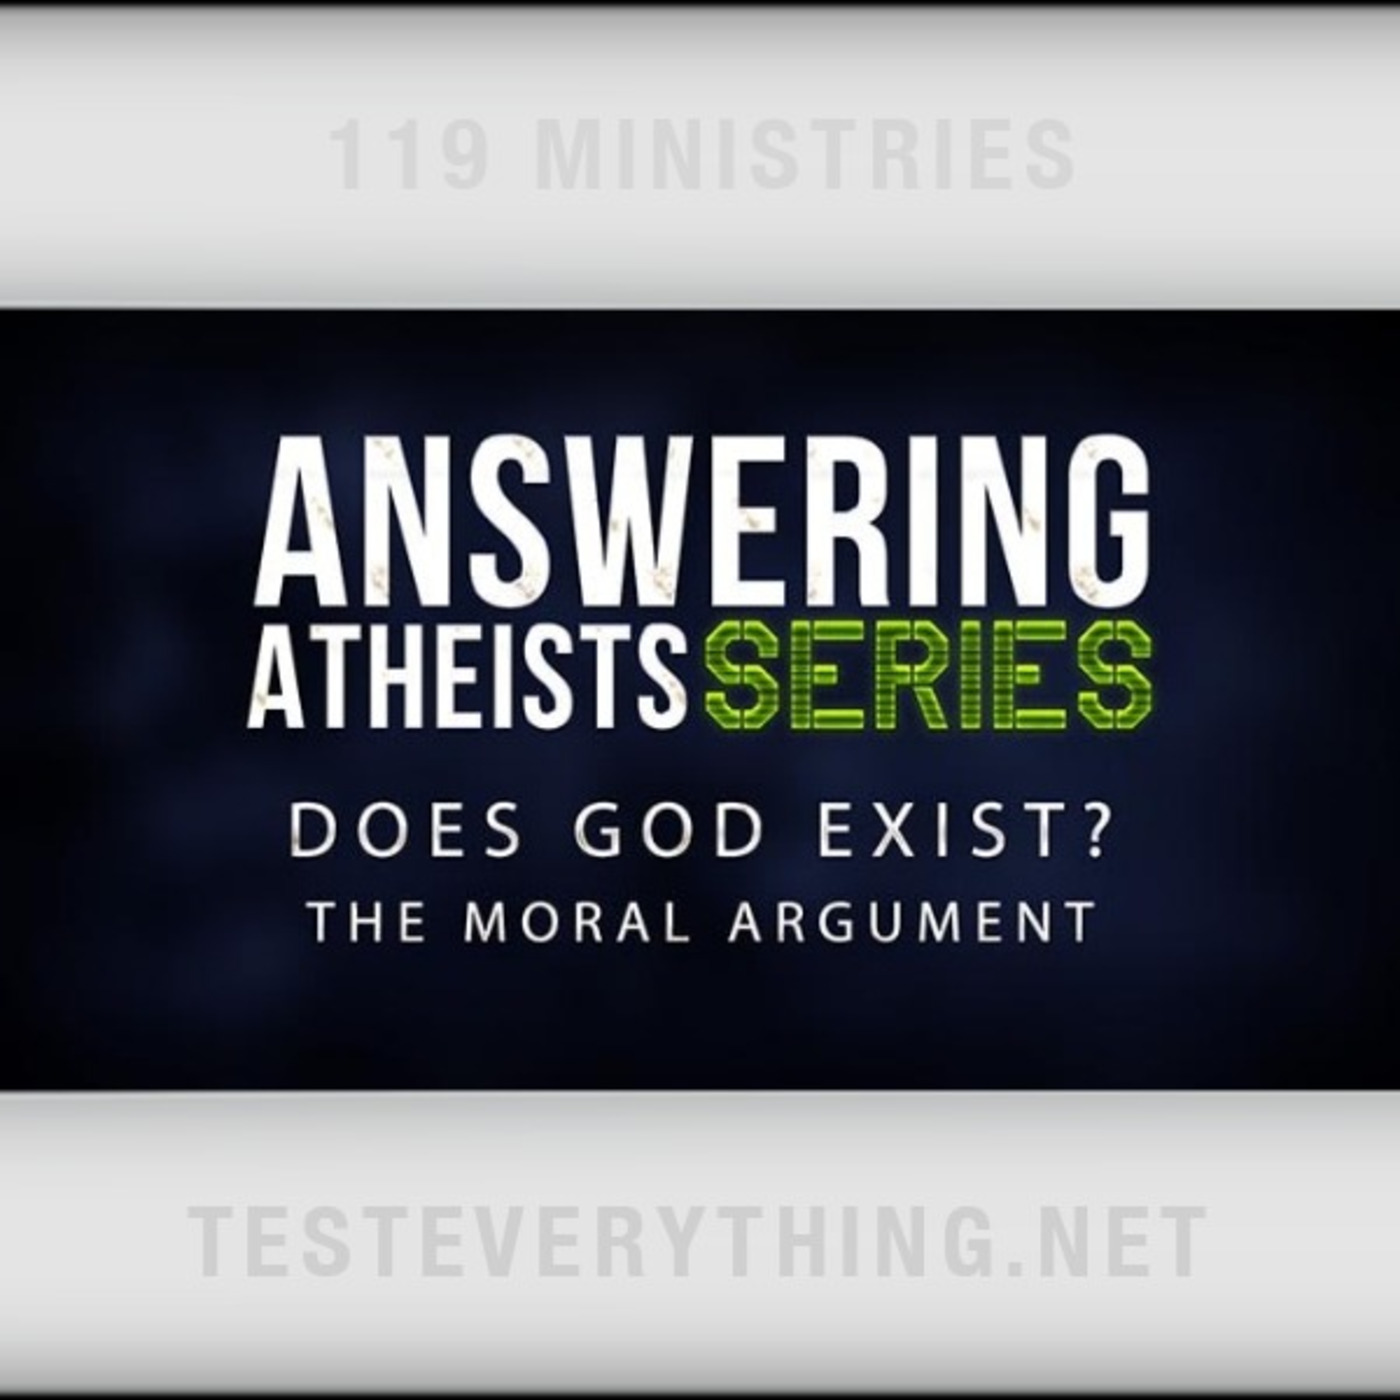 Episode 512: Answering Atheists: Does God Exist? - The Moral Argument